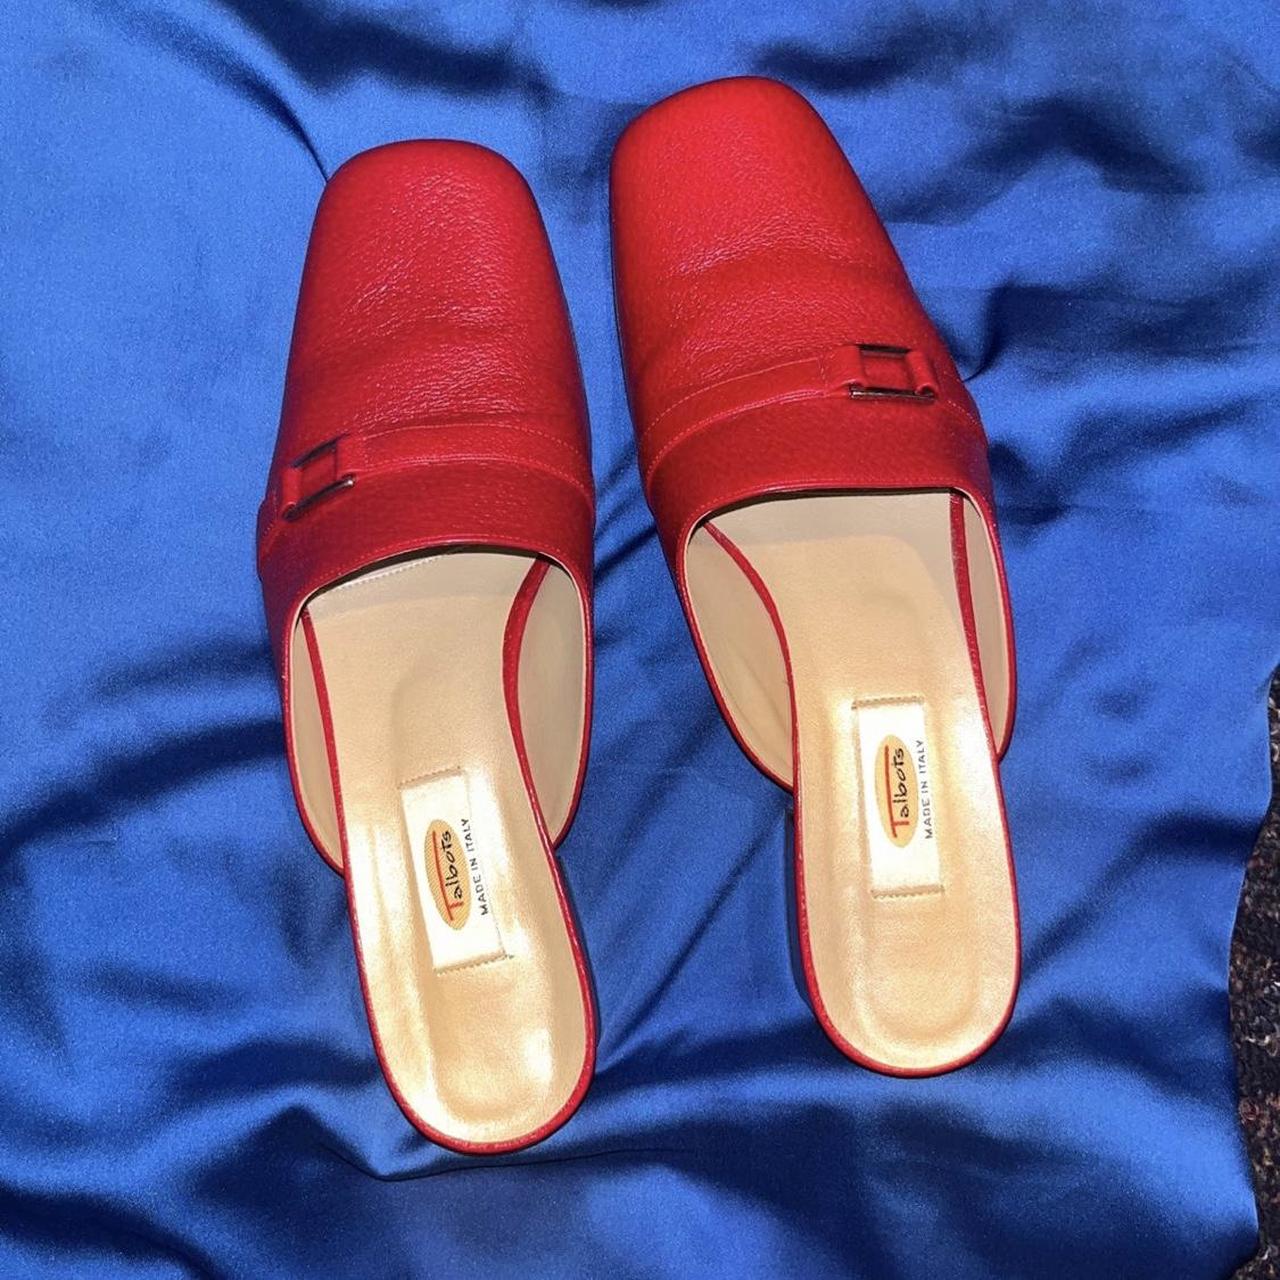 Talbots red heeled shoes - Depop